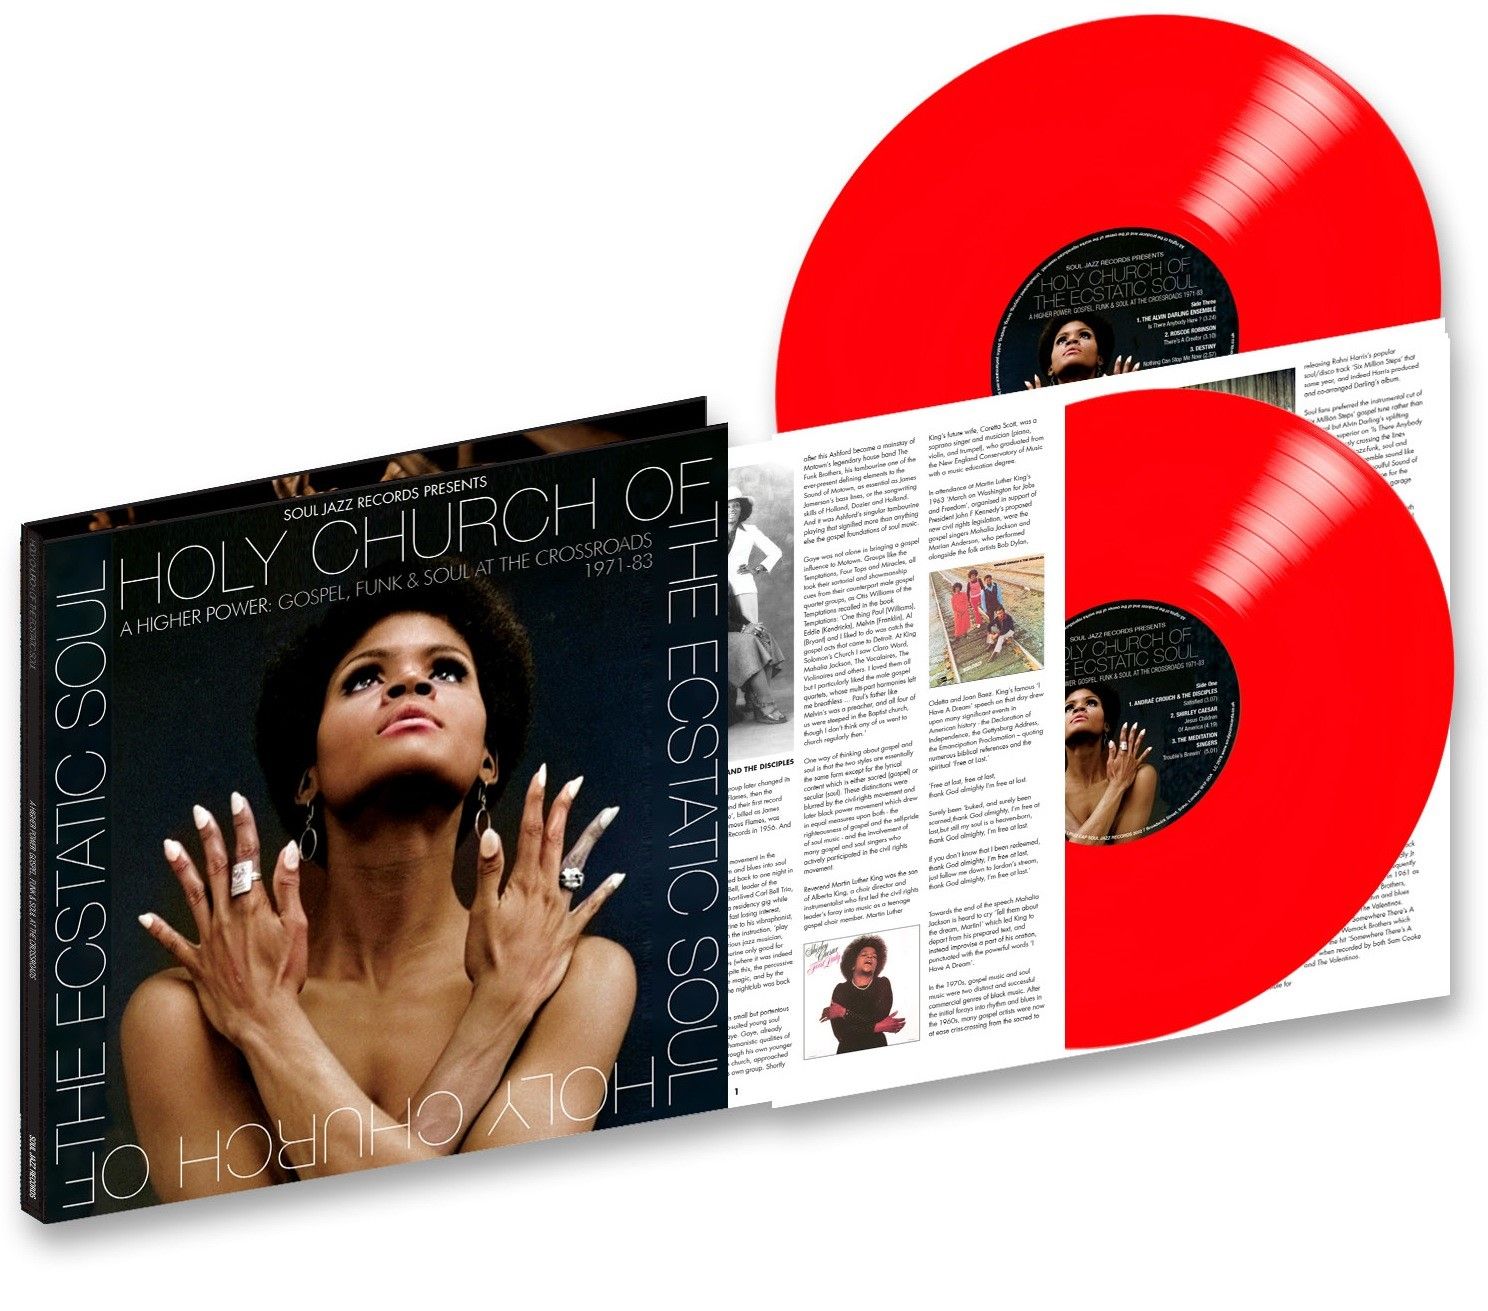 VARIOUS - Soul Jazz Records Presents: Holy Church of the Ecstatic Soul: A Higher Power: Gospel, Soul and Funk at the Crossroads 1971-83 - 2LP - Red Vinyl [RSD23]